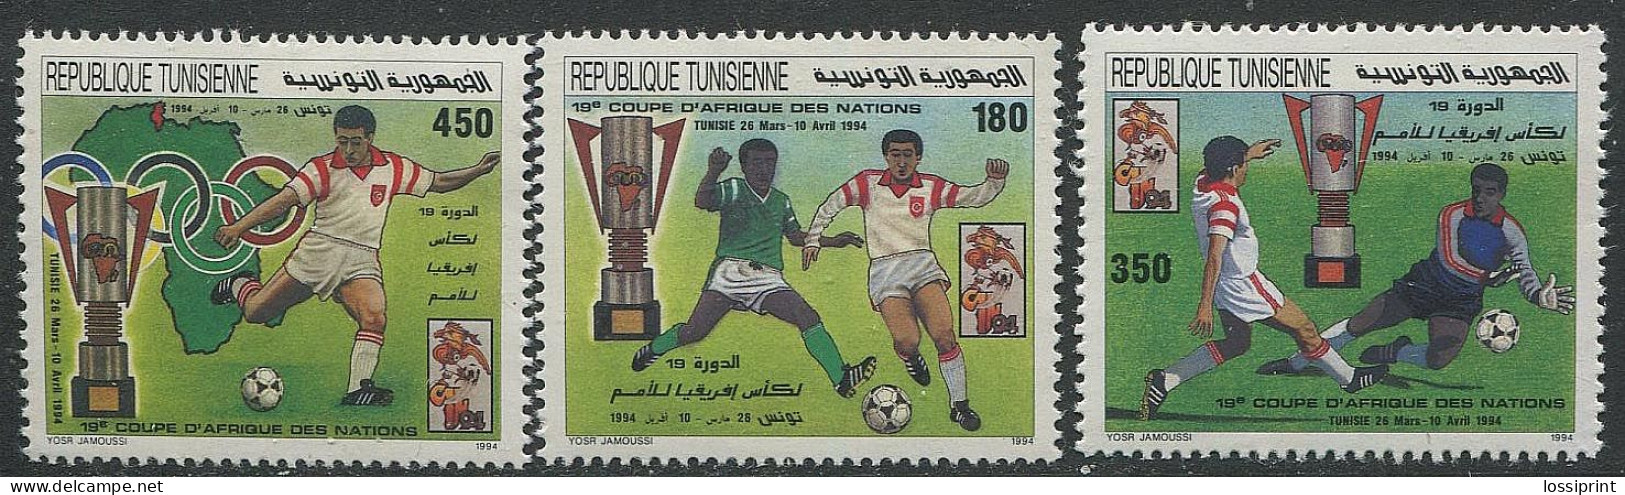 Tunisie:Tunisia:Unused Stamps Serie African Cup, Football, Soccer, 1994, MNH - Africa Cup Of Nations